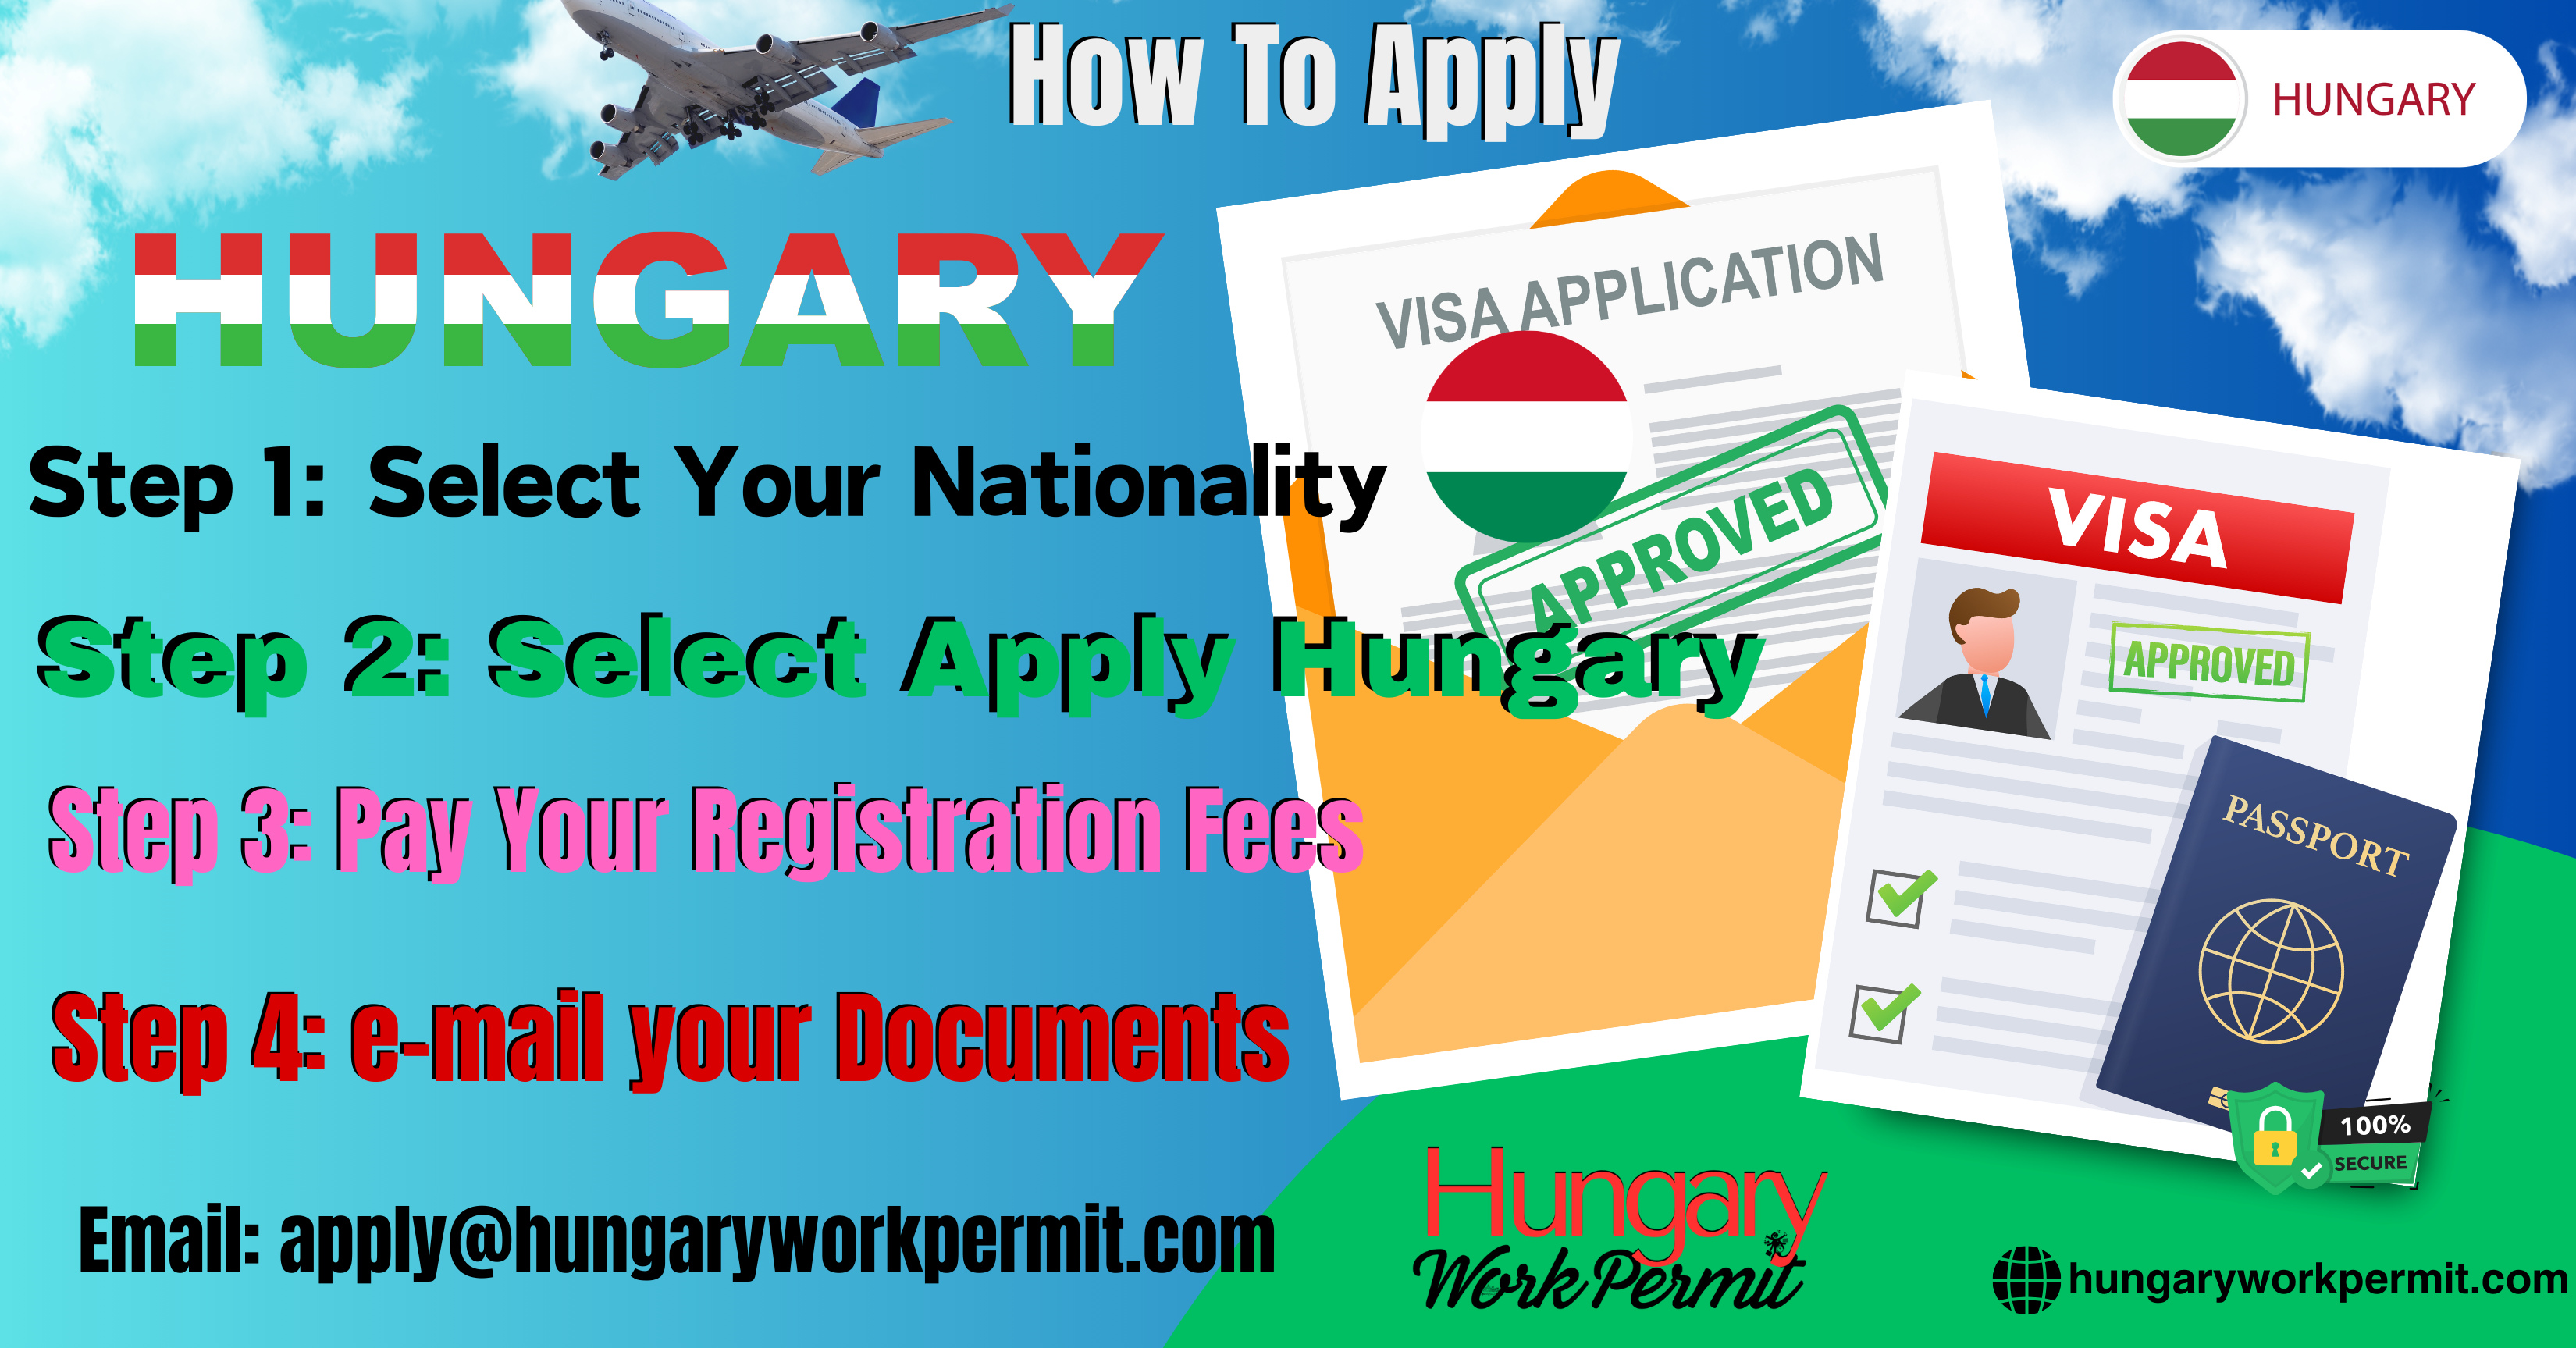 How to Applying for a Hungary Visa?